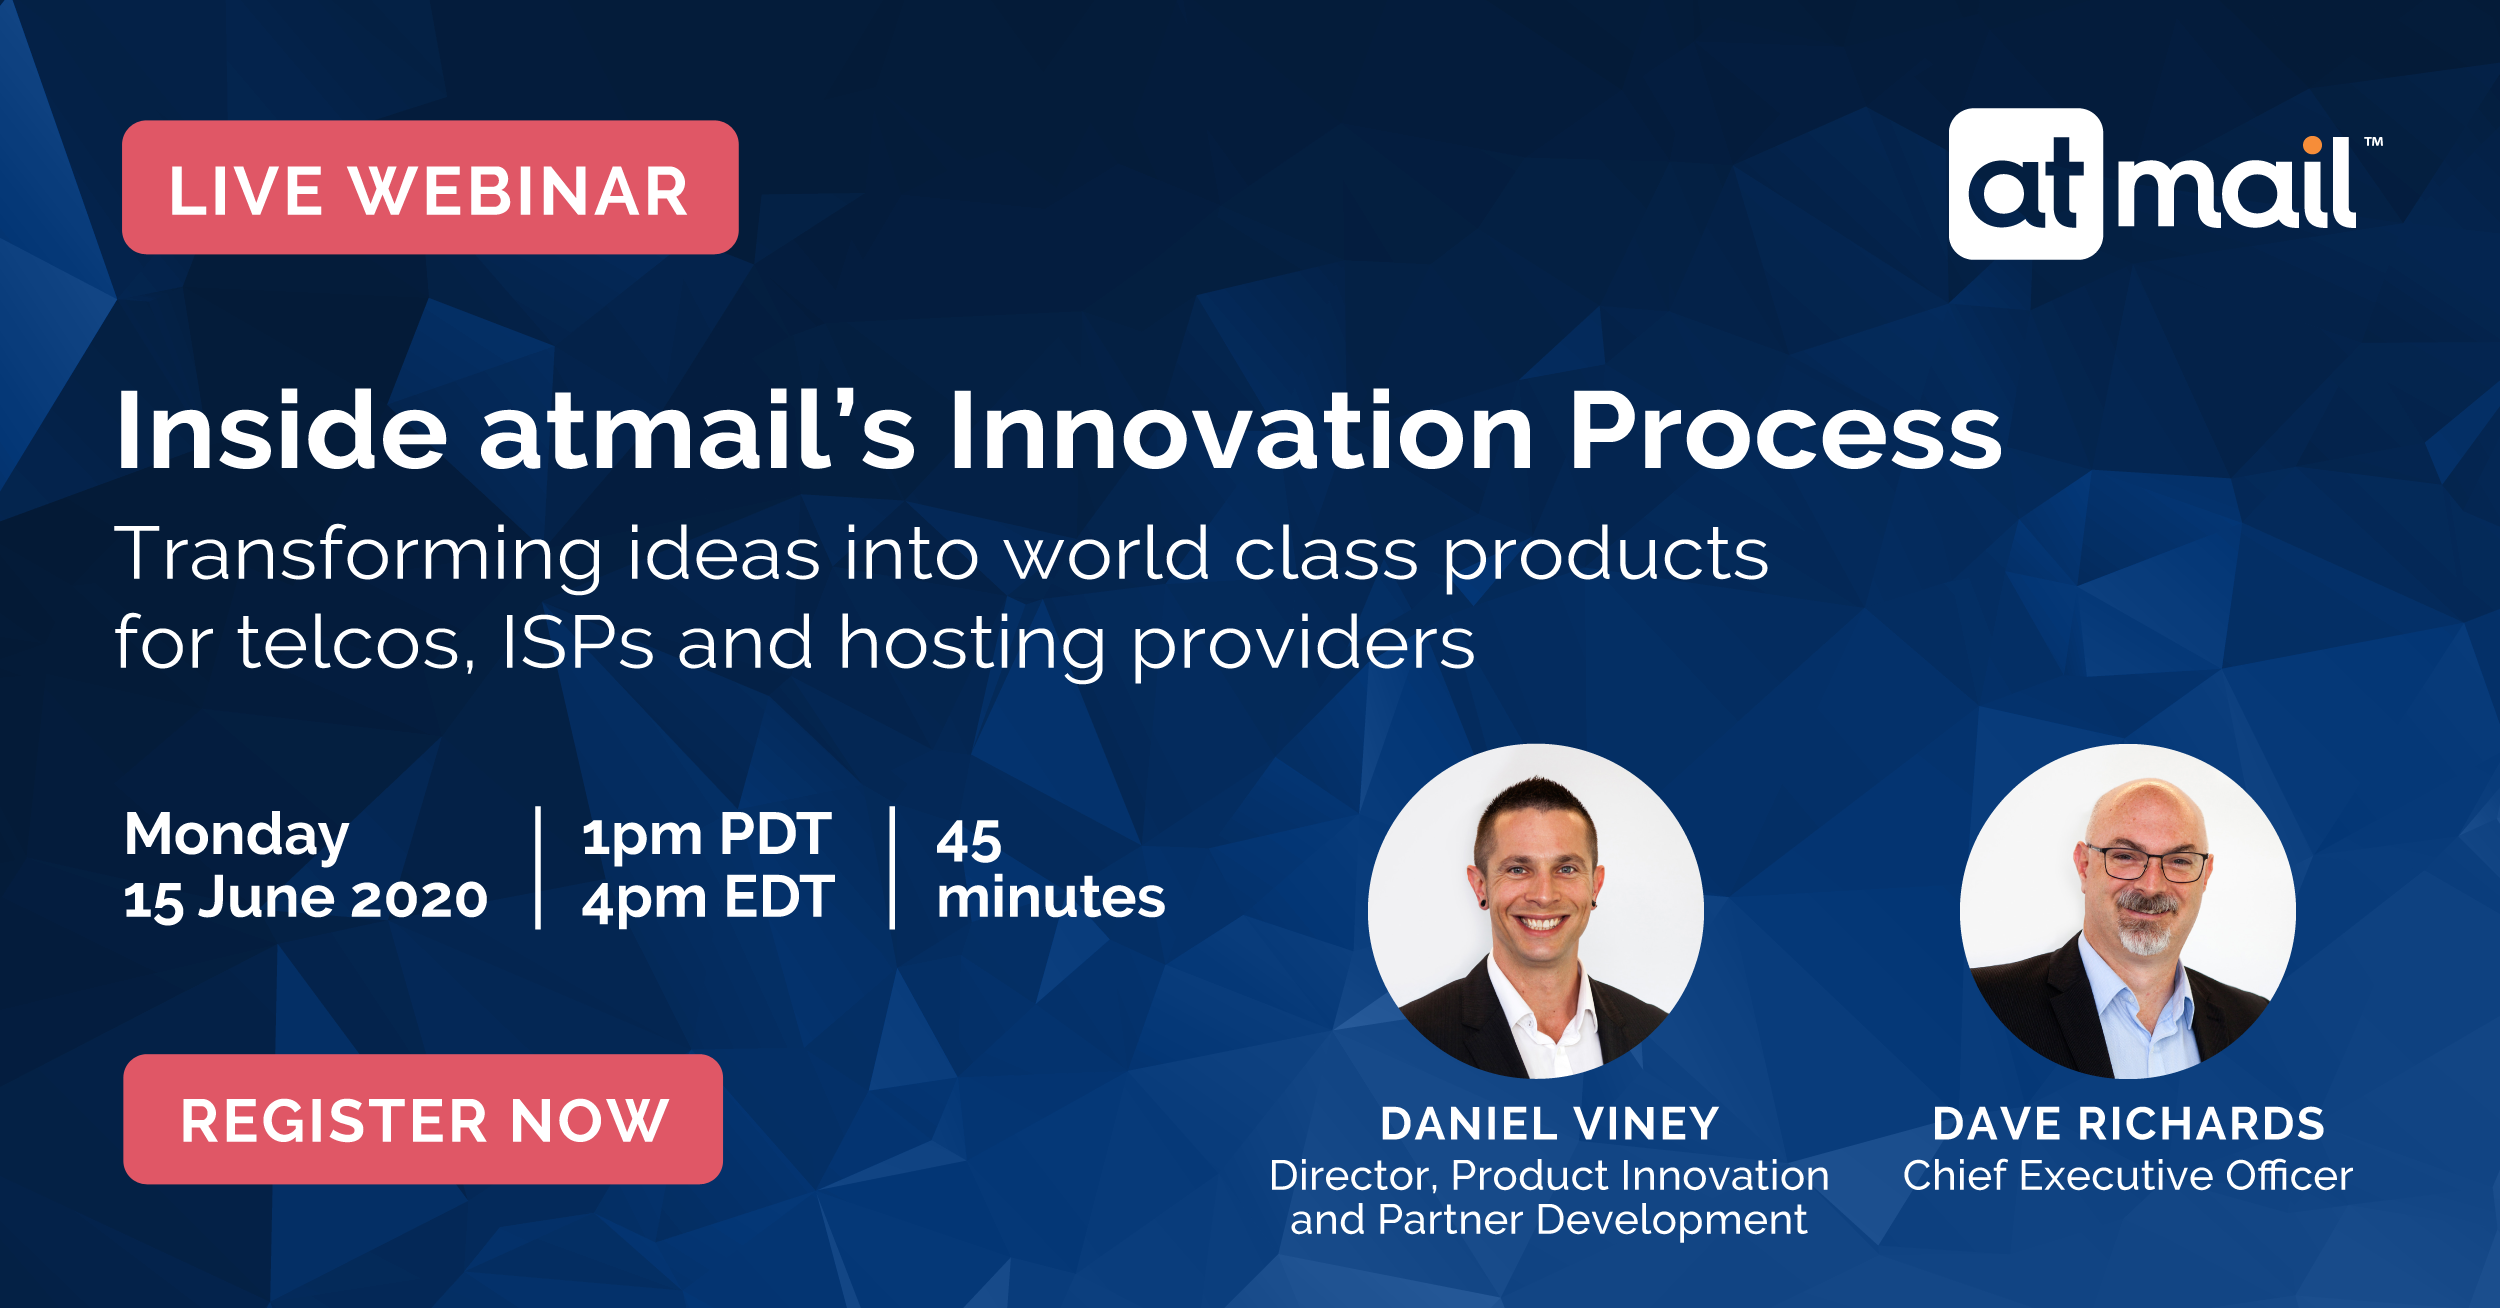 atmail's innovation process, Daniel Viney, Dave Richards, email hosting for telcos, ISPs and hosting providers